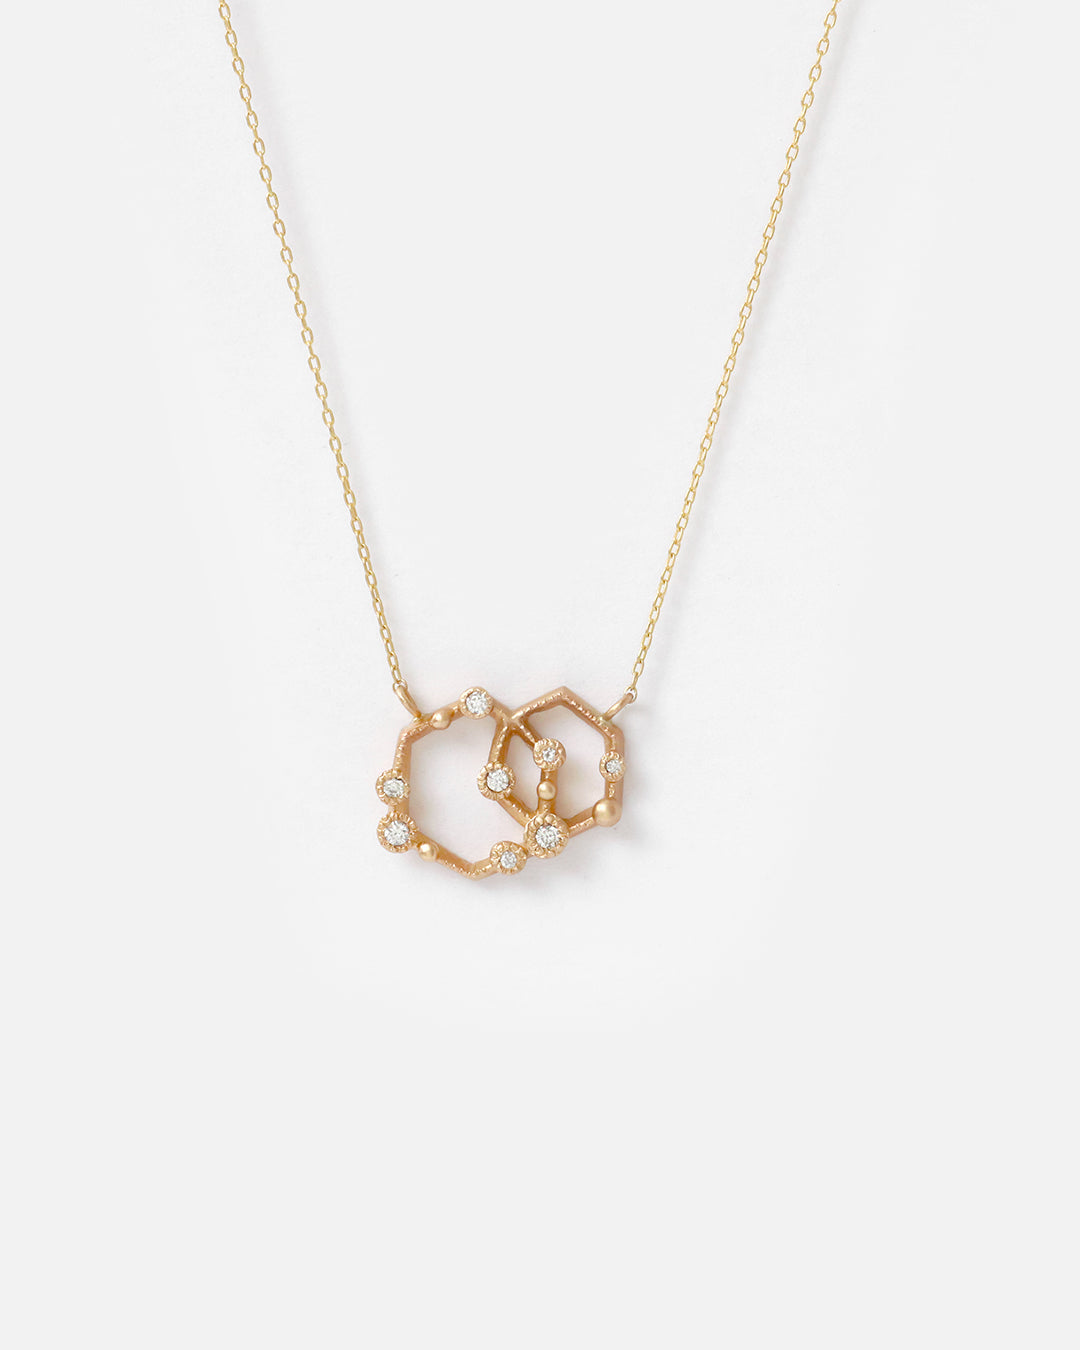 Melee 63 / Double Hex Pendant By Hiroyo